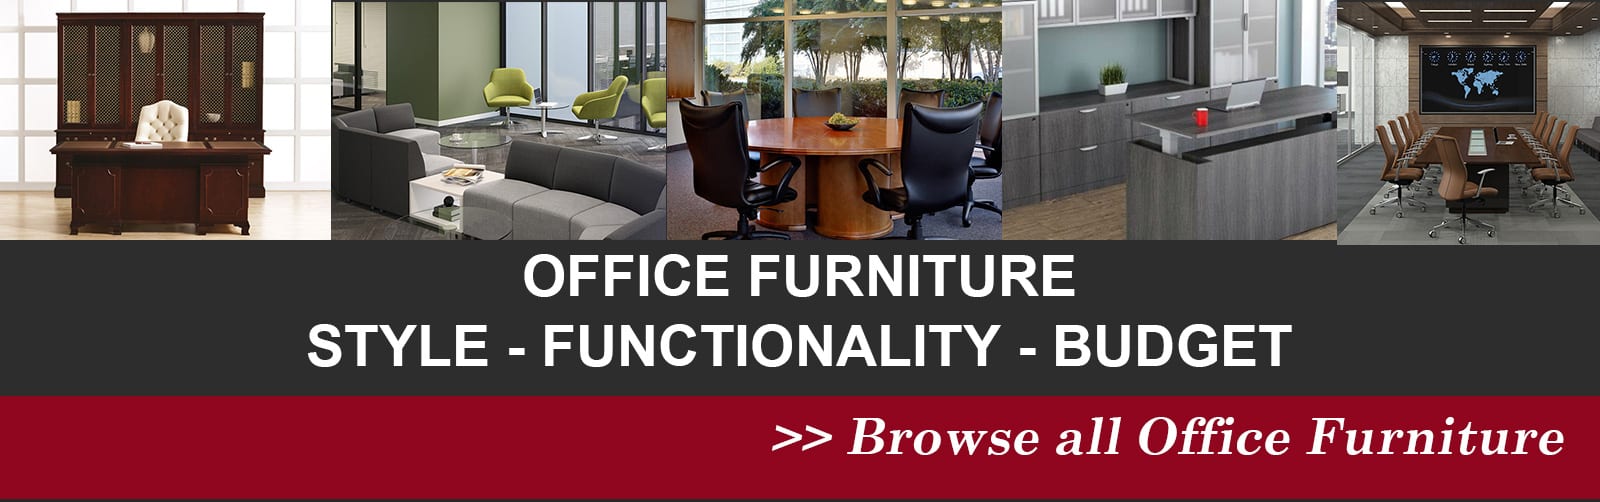 New Used Office Furniture Office Furniture Warehouse